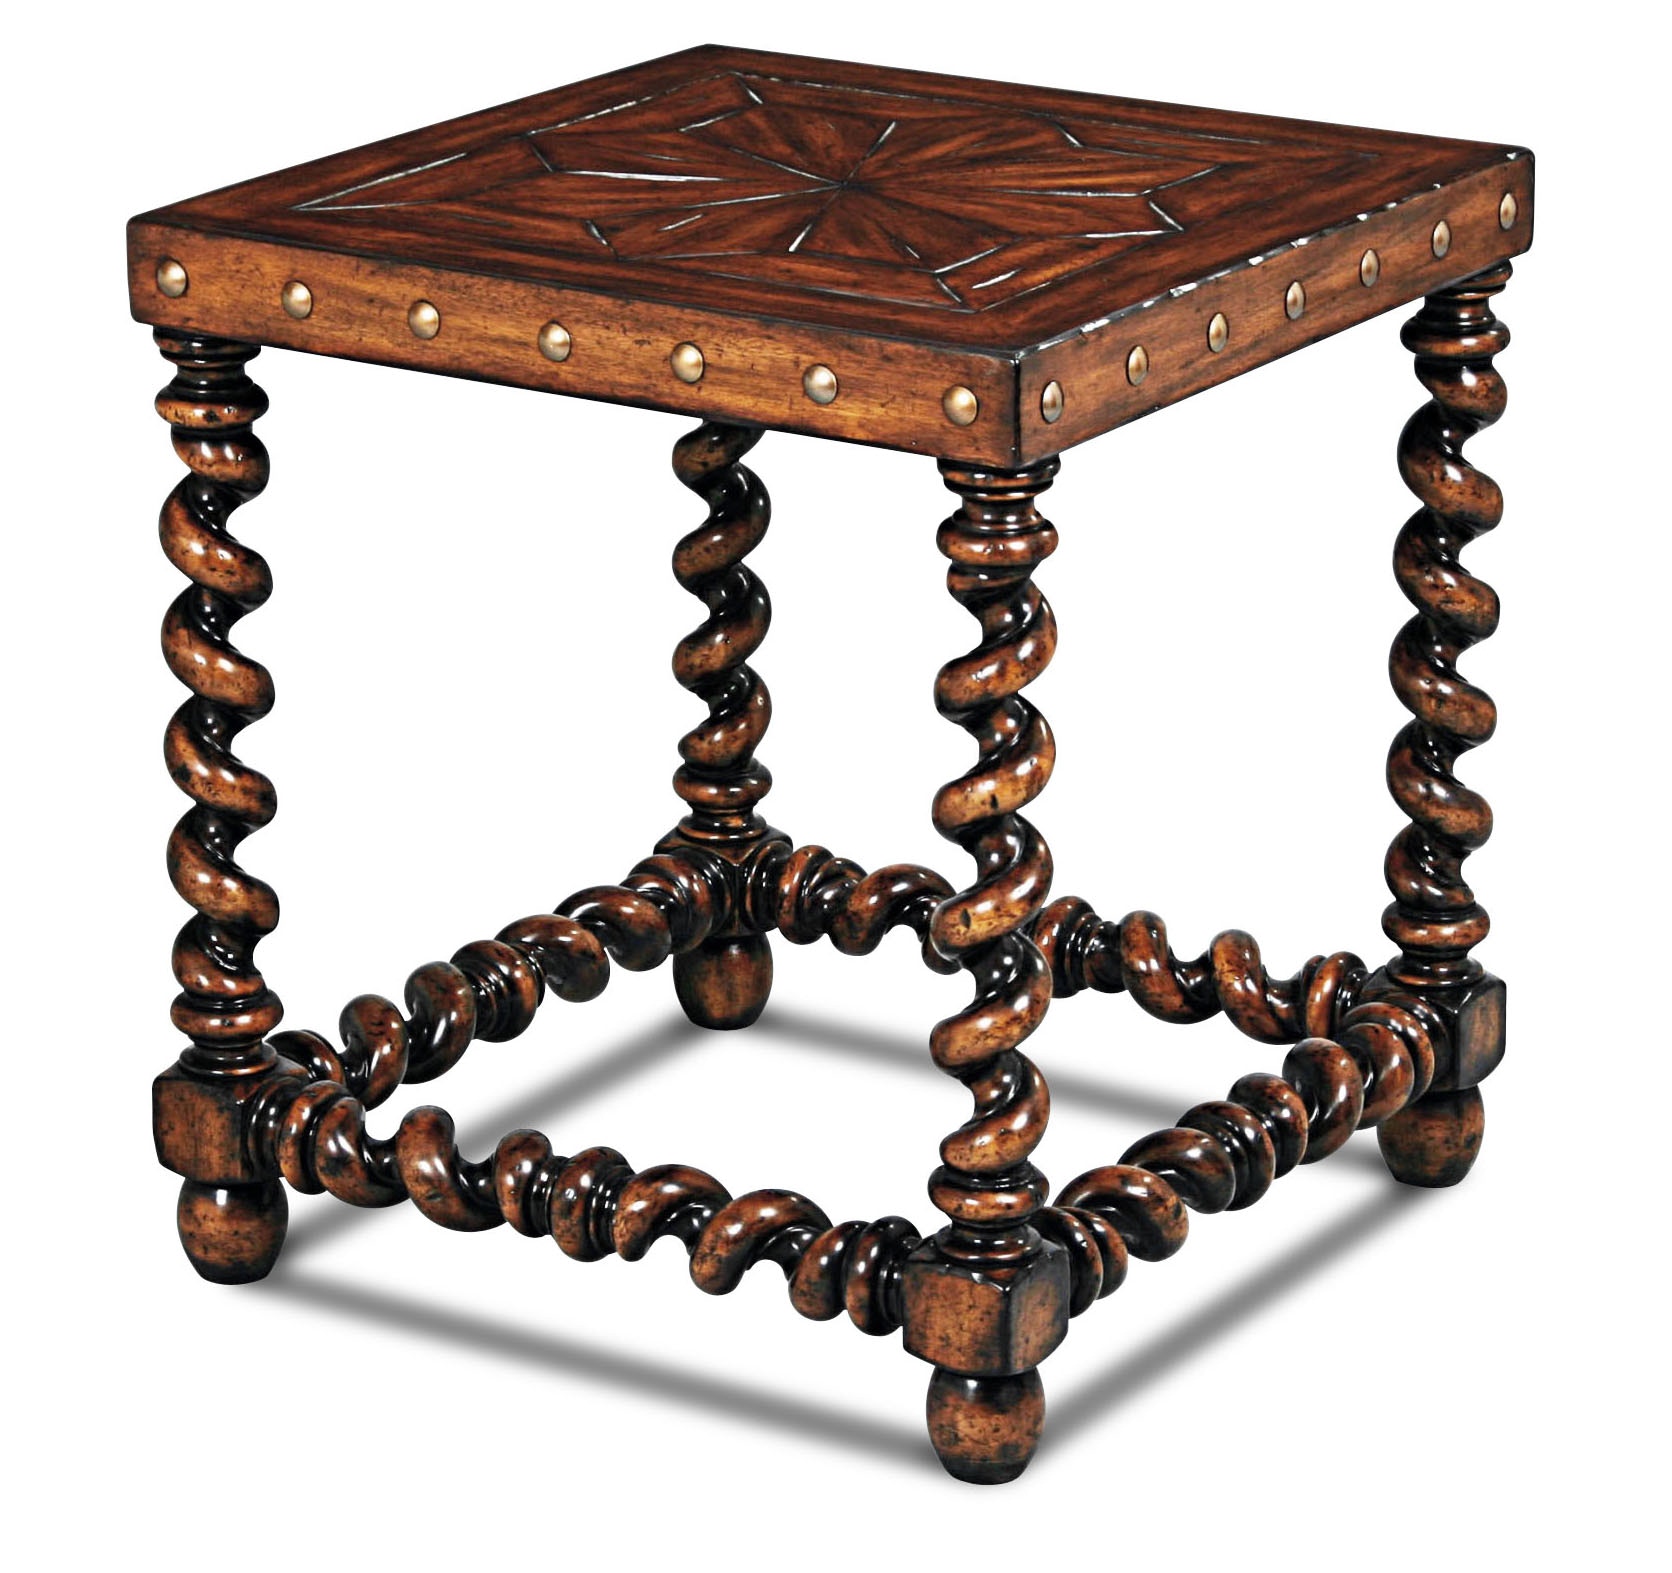 Maitland-Smith Living Room Serpentine Side Table (Sh06-062509) 89 